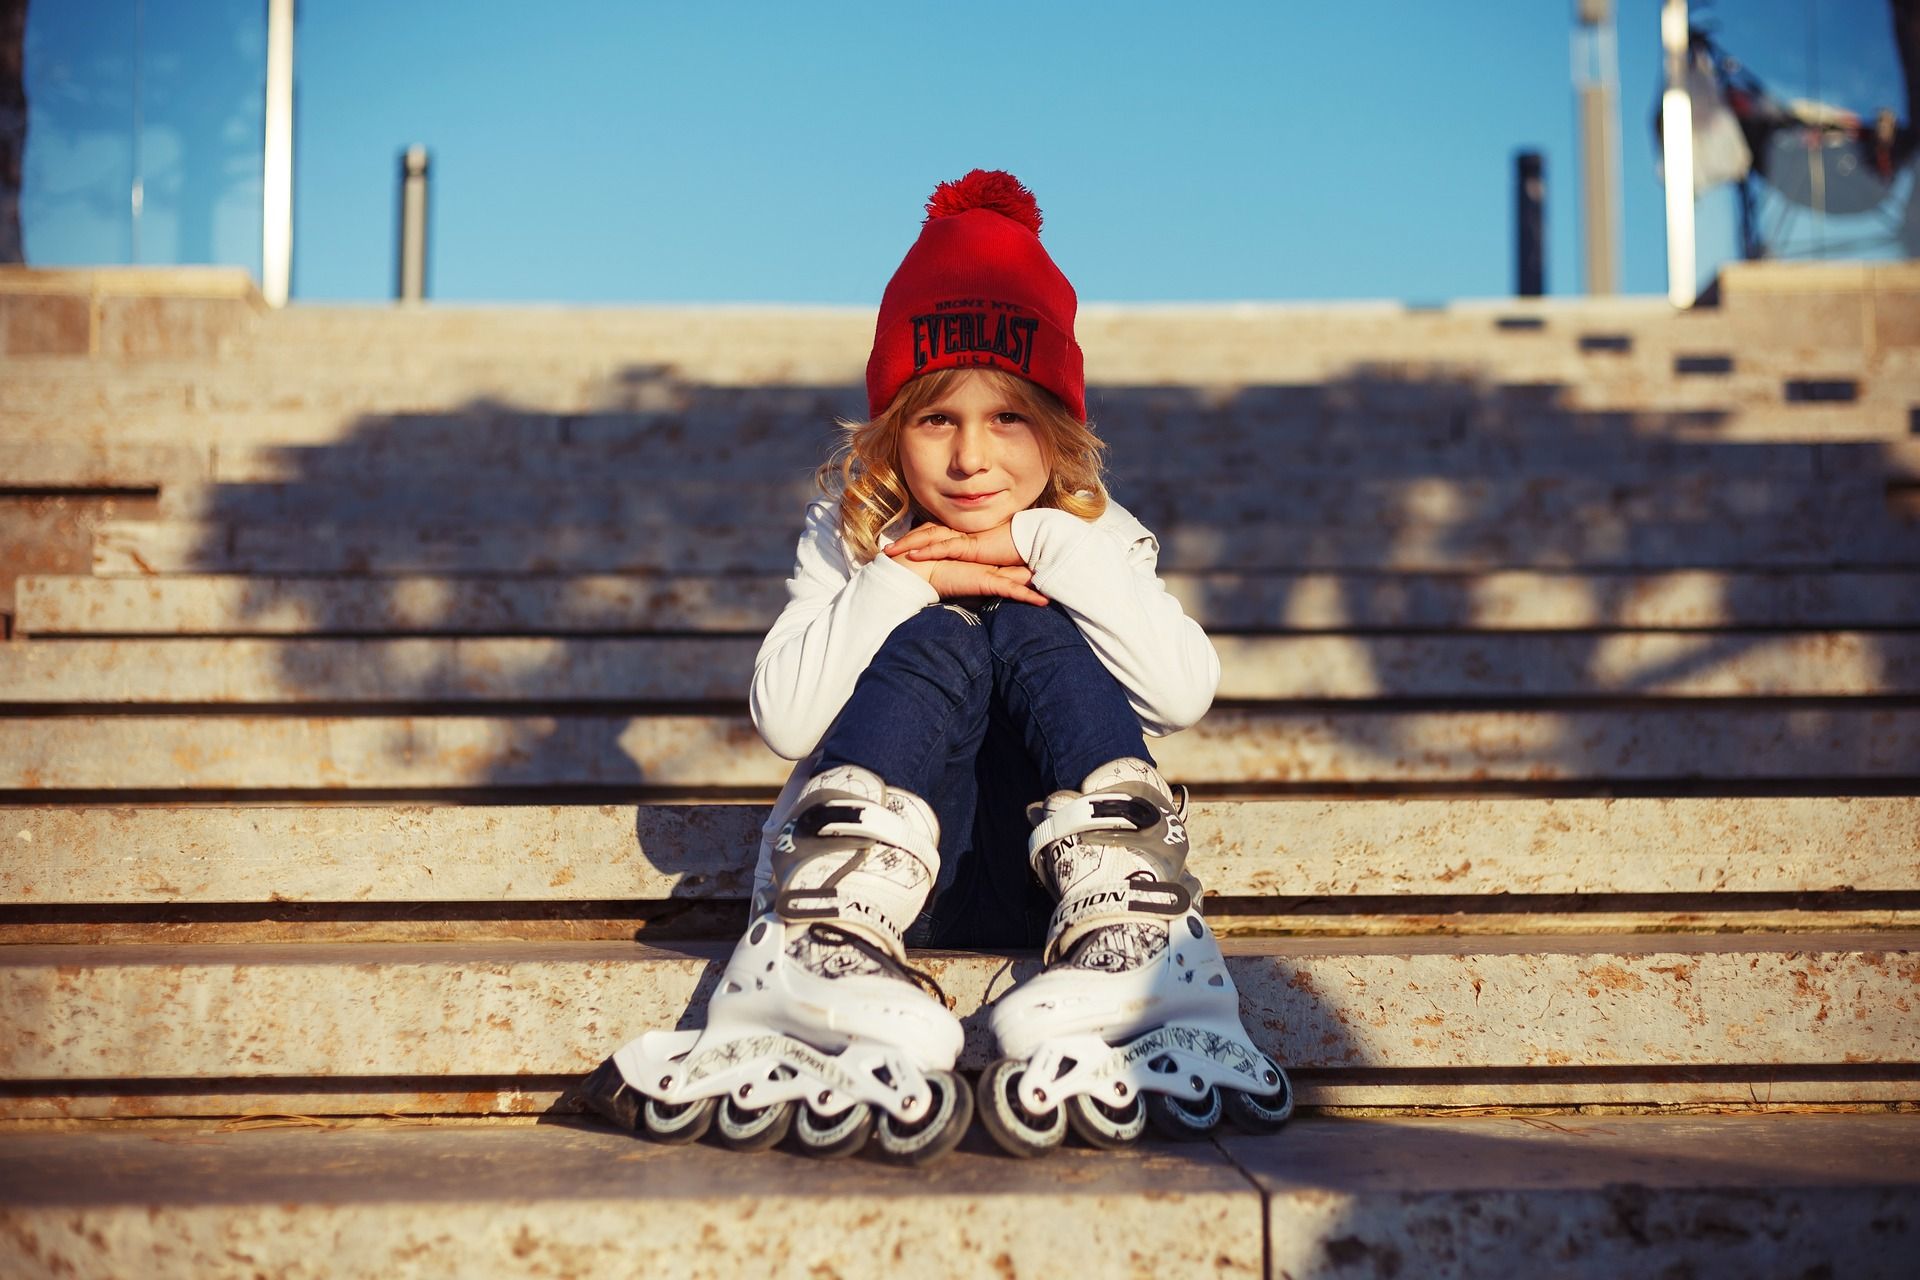 Young girl sitting down outdoors wearing inline skates